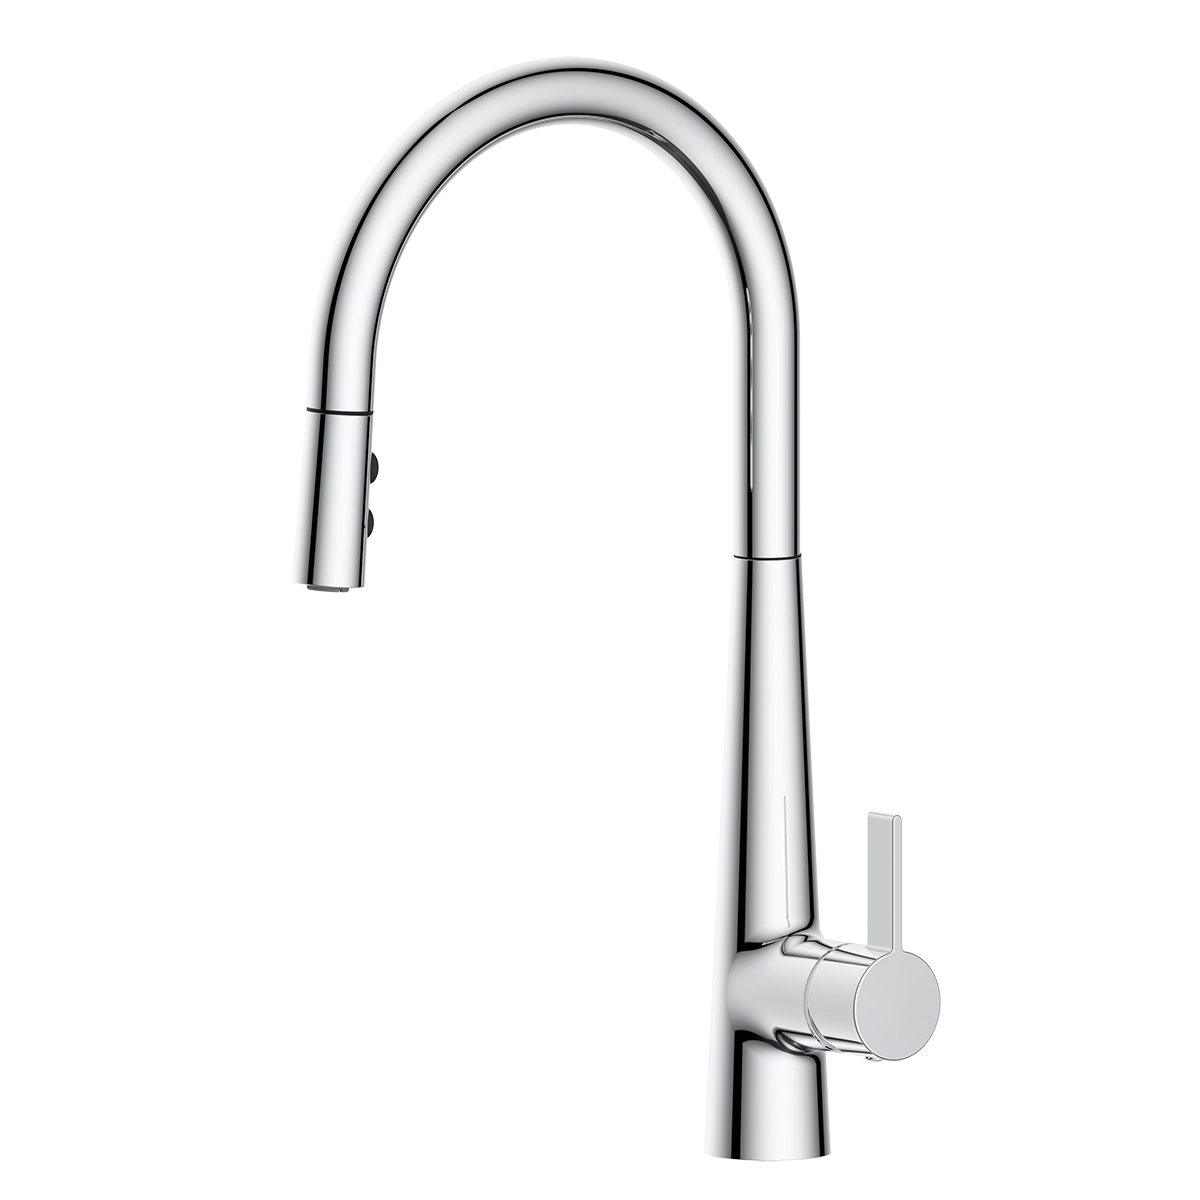 Aquacubic cUPC NSF Sanitary Goose Neck Flexible Kitchen Sink Faucet with Pull Down Sprayer